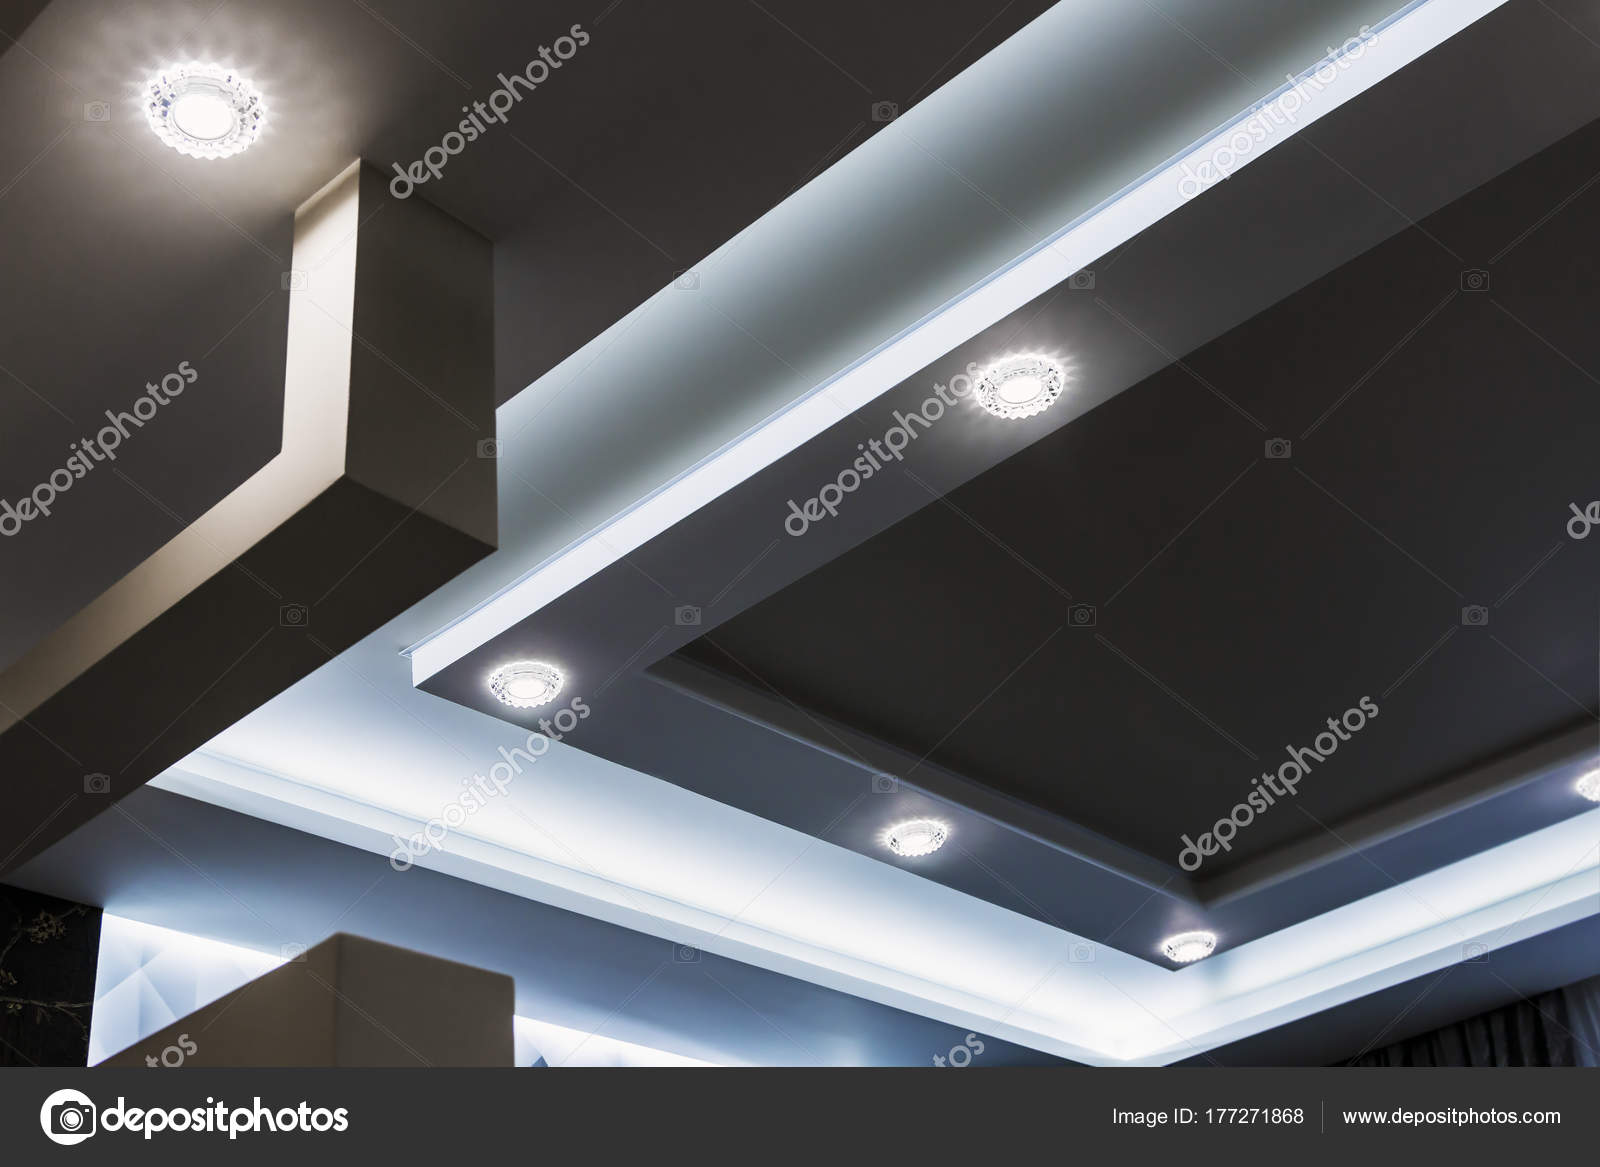 Suspended Ceiling And Drywall Construction In The Decoration Of Stock Photo By C Doroshin